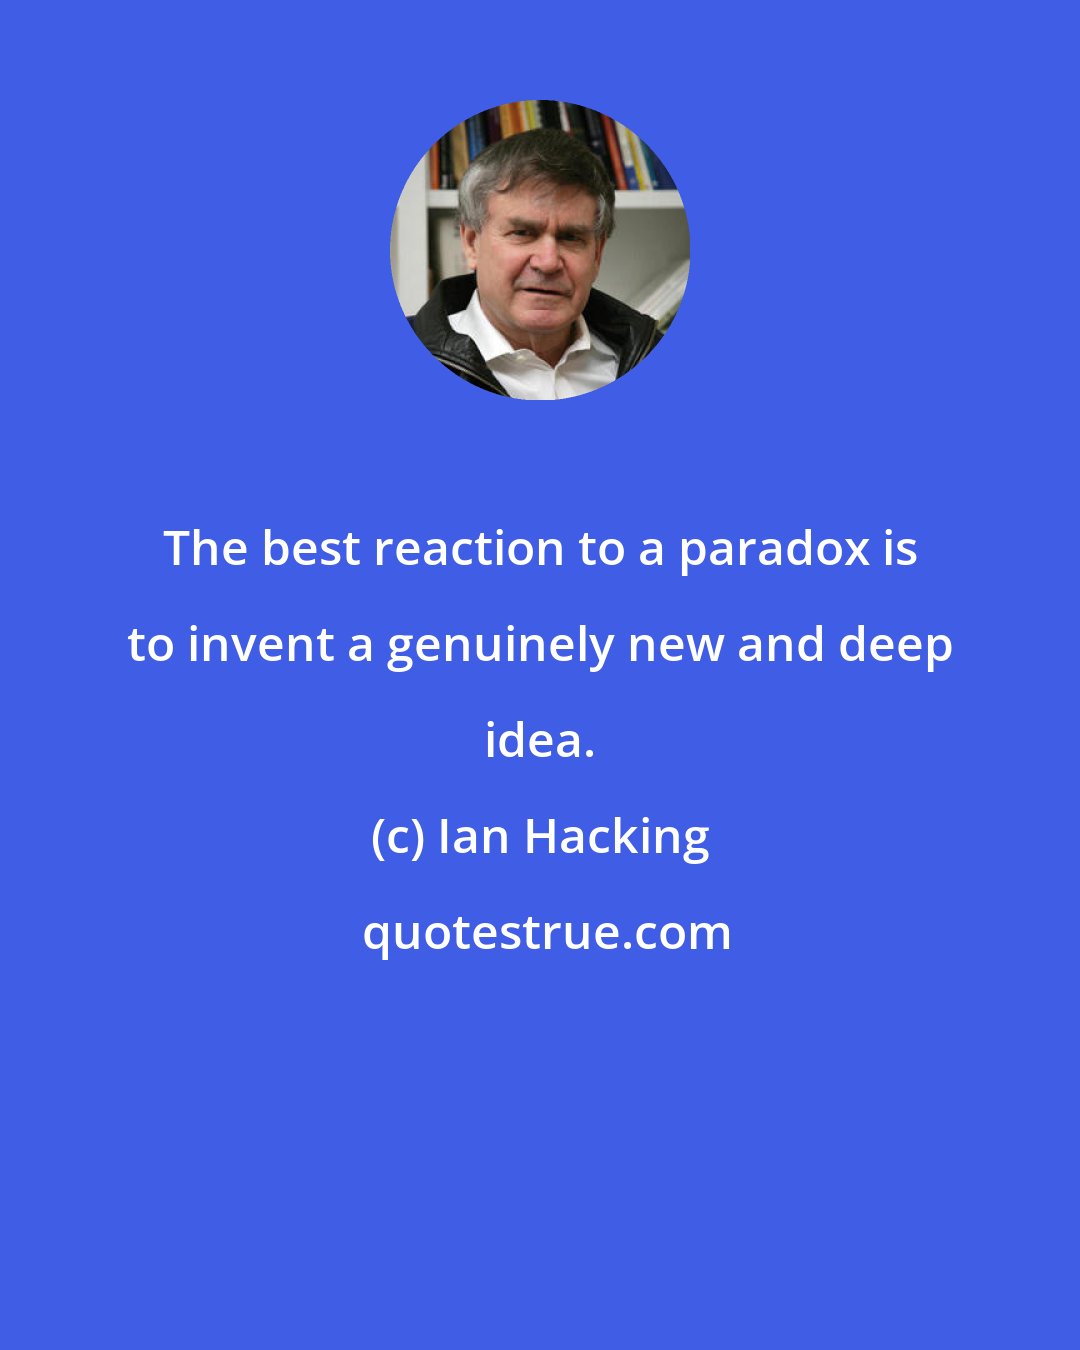 Ian Hacking: The best reaction to a paradox is to invent a genuinely new and deep idea.